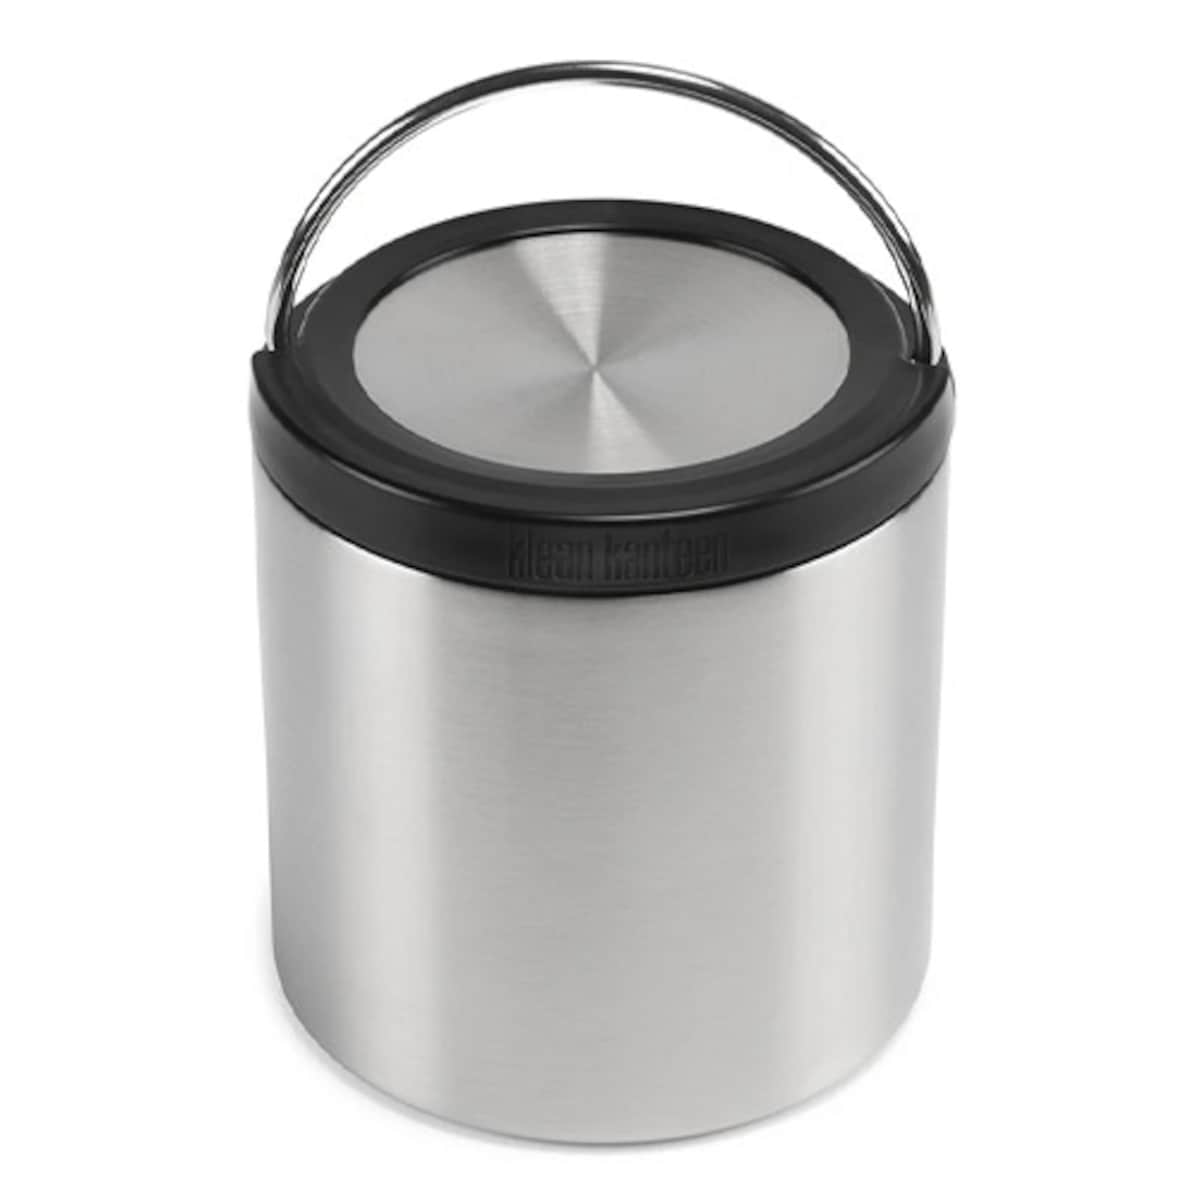 Klean Kanteen TKCanister 946ml with Insulated Lid Stainless Steel